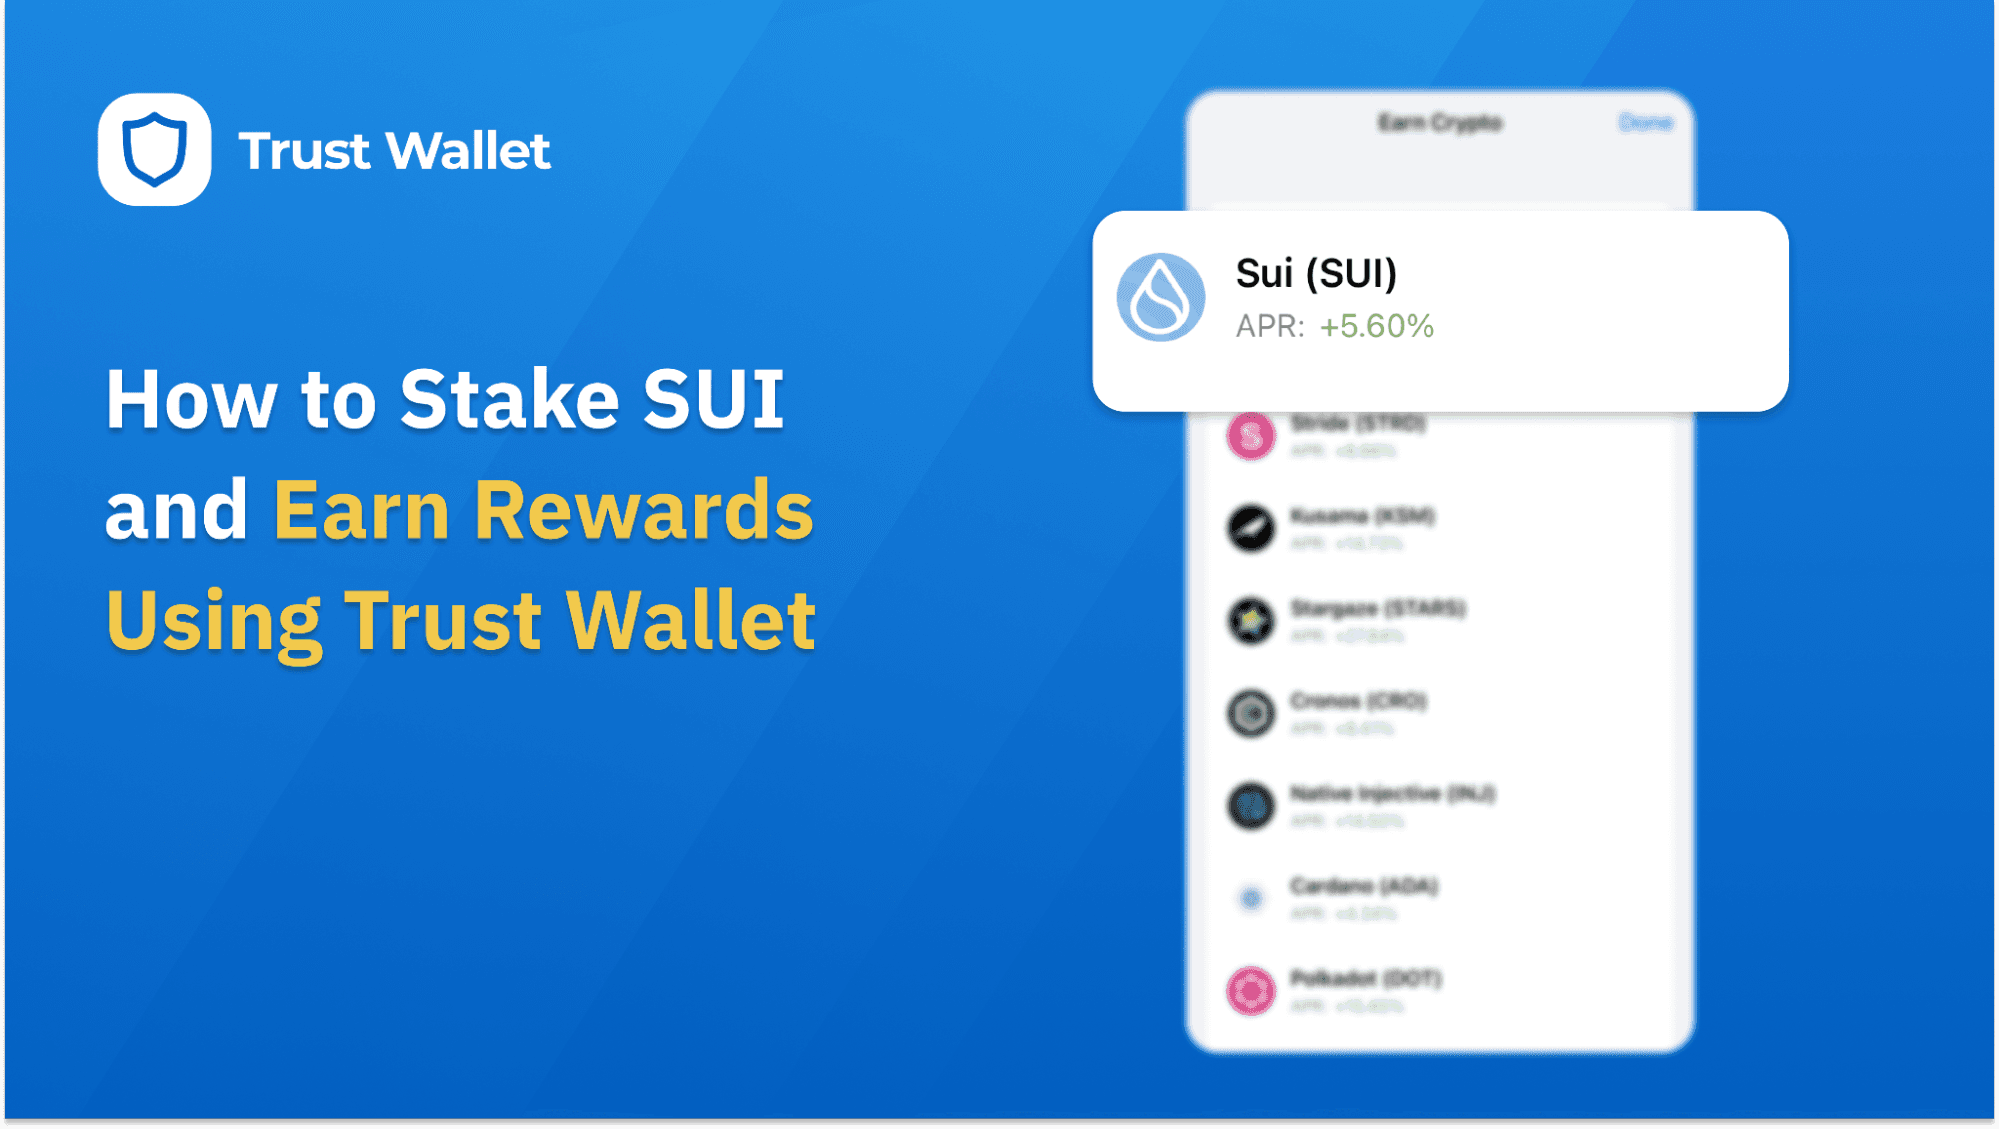 How to Stake SUI and Earn Rewards Using Trust Wallet